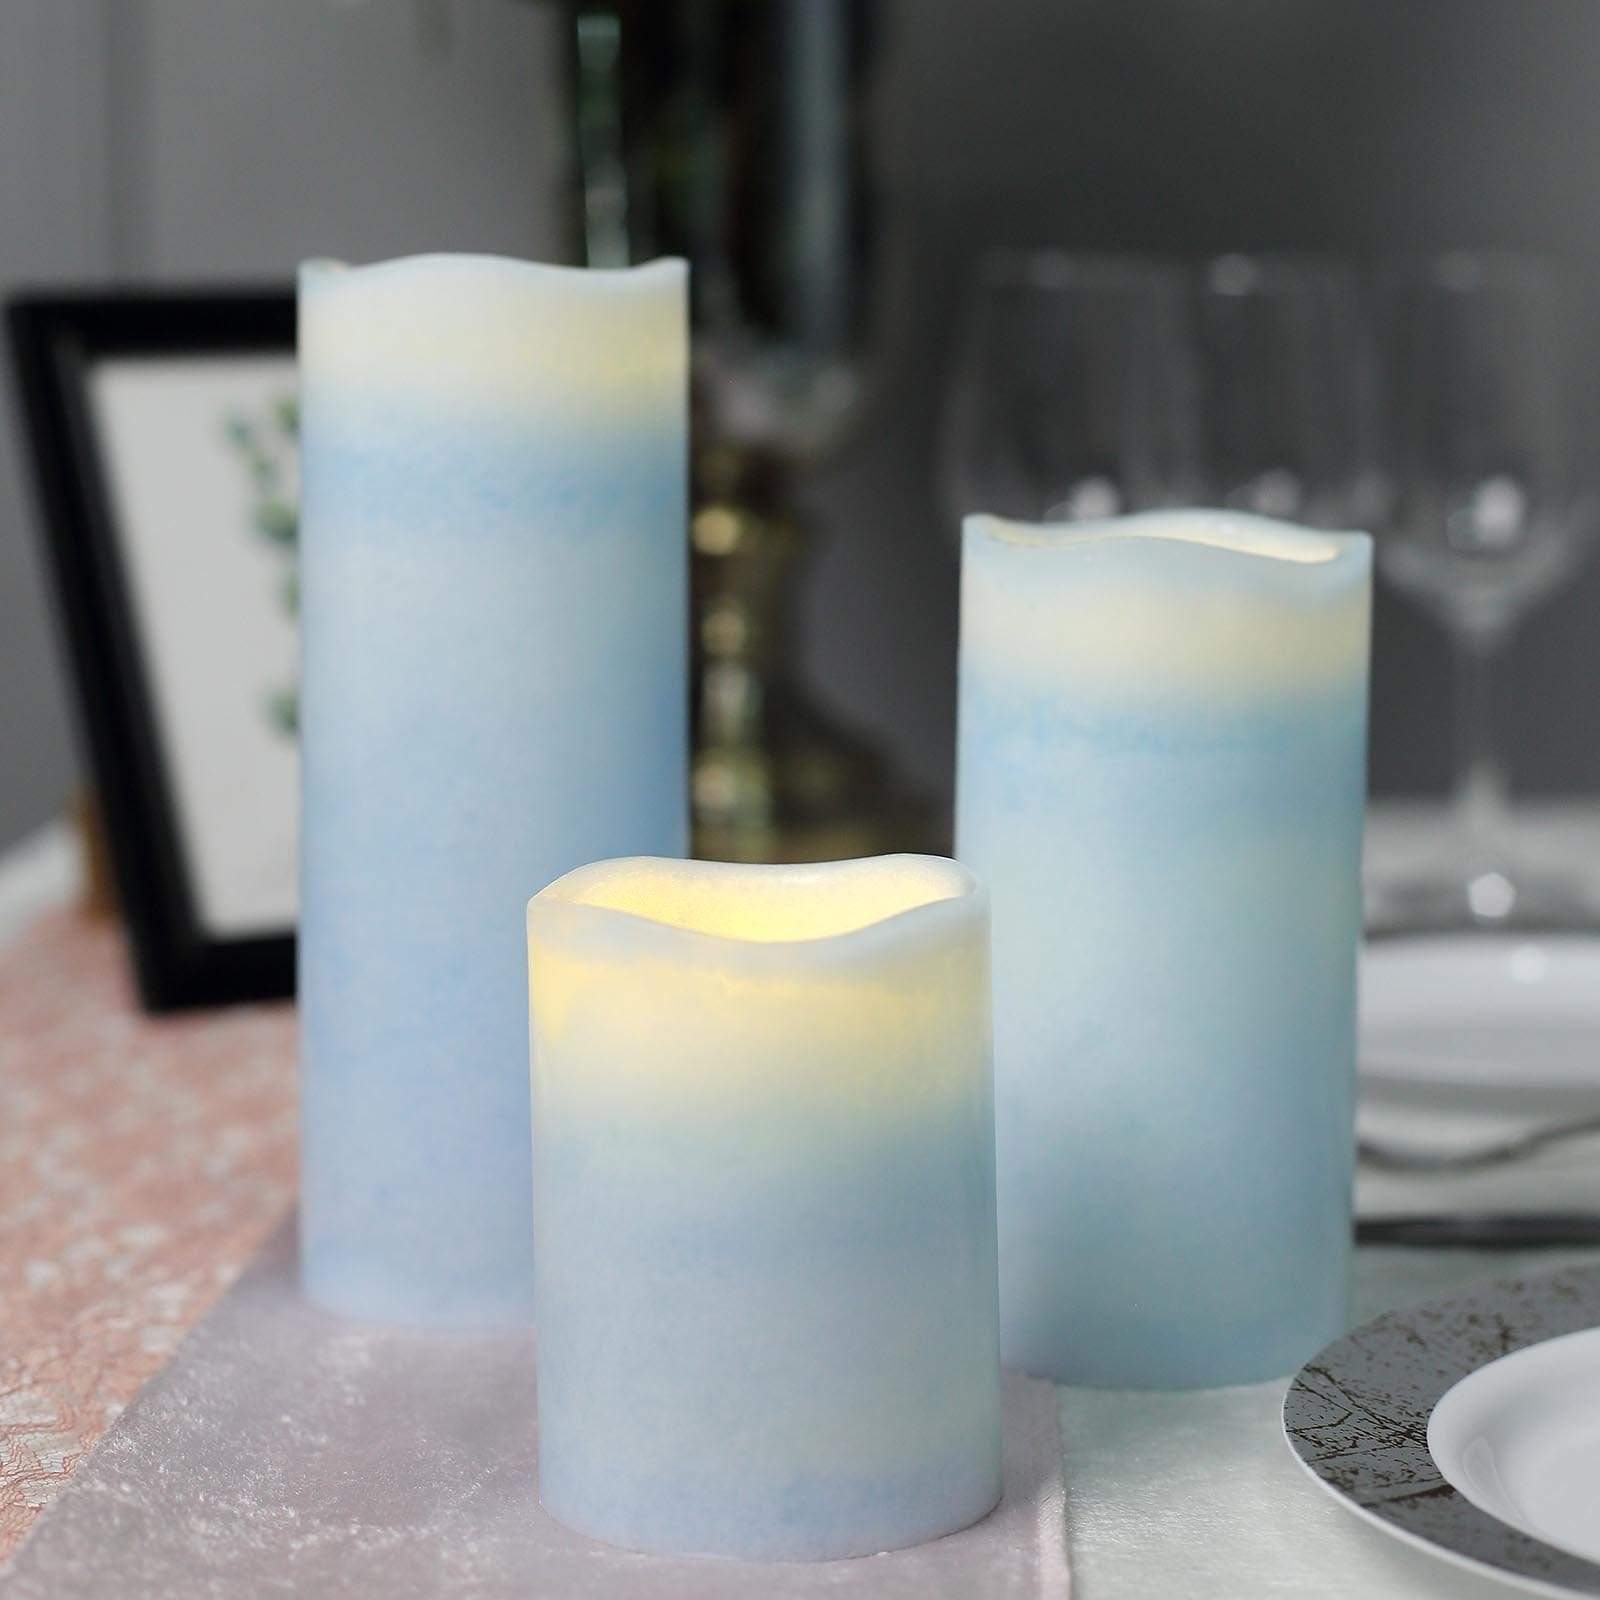 3 pcs LED Pillar Candles Lights with Remote Control